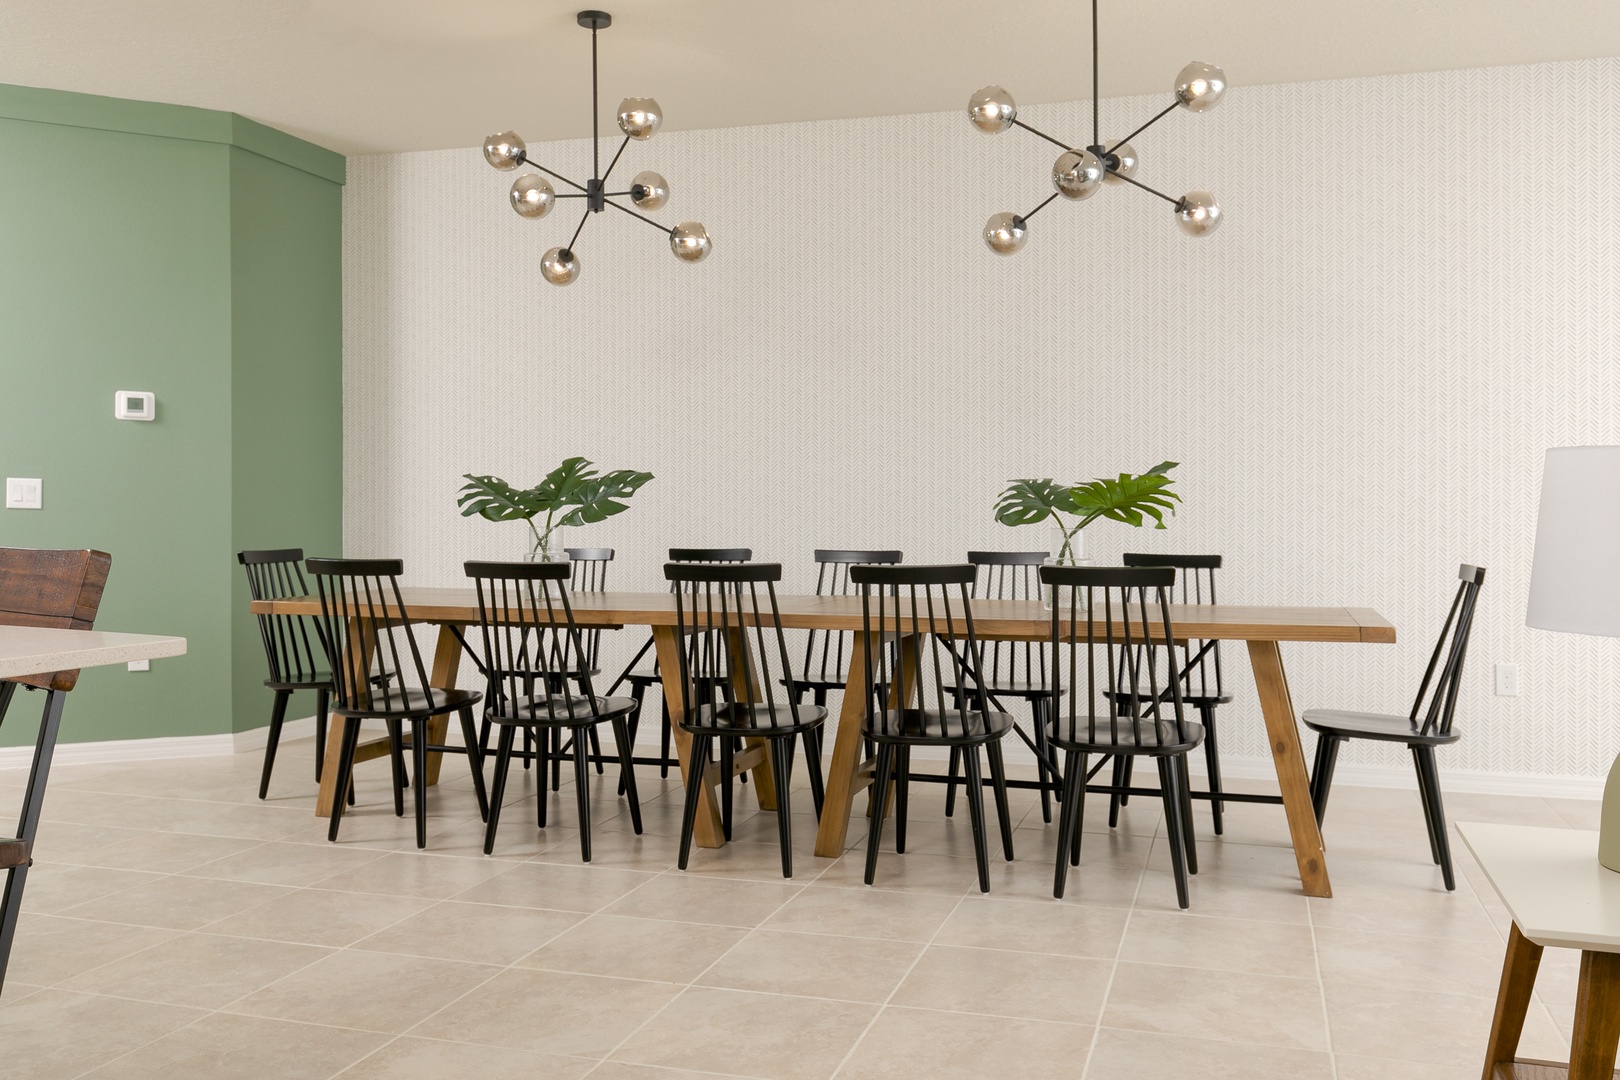 Gather for meals together at the chic dining table, offering seating for 12